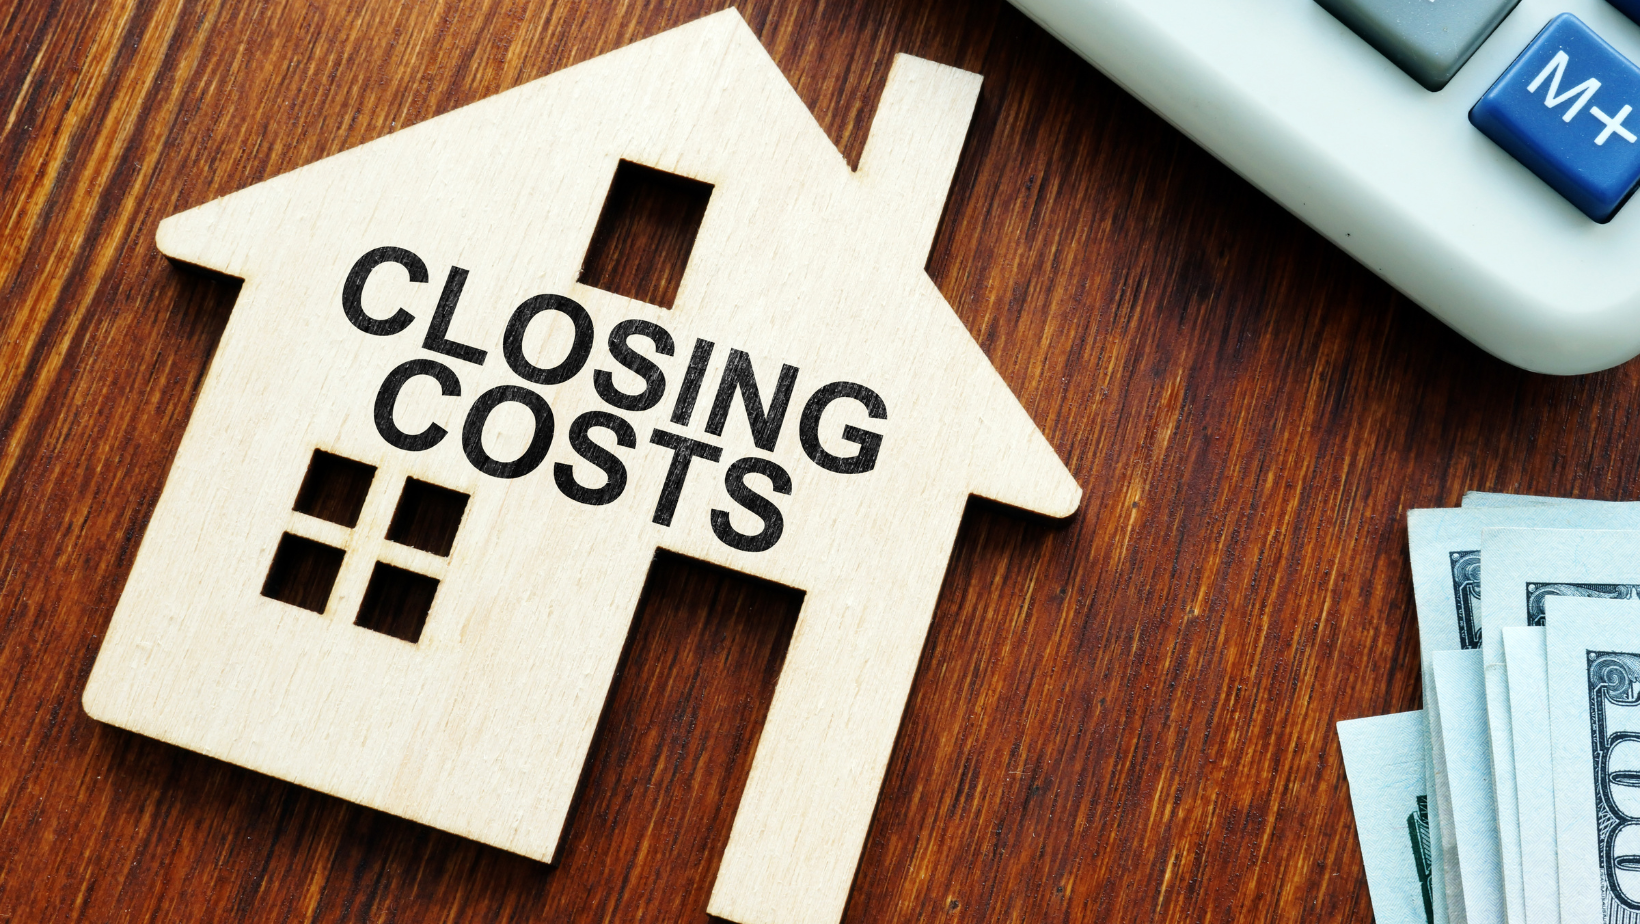 Closing Costs Plan - The Tuttle Group